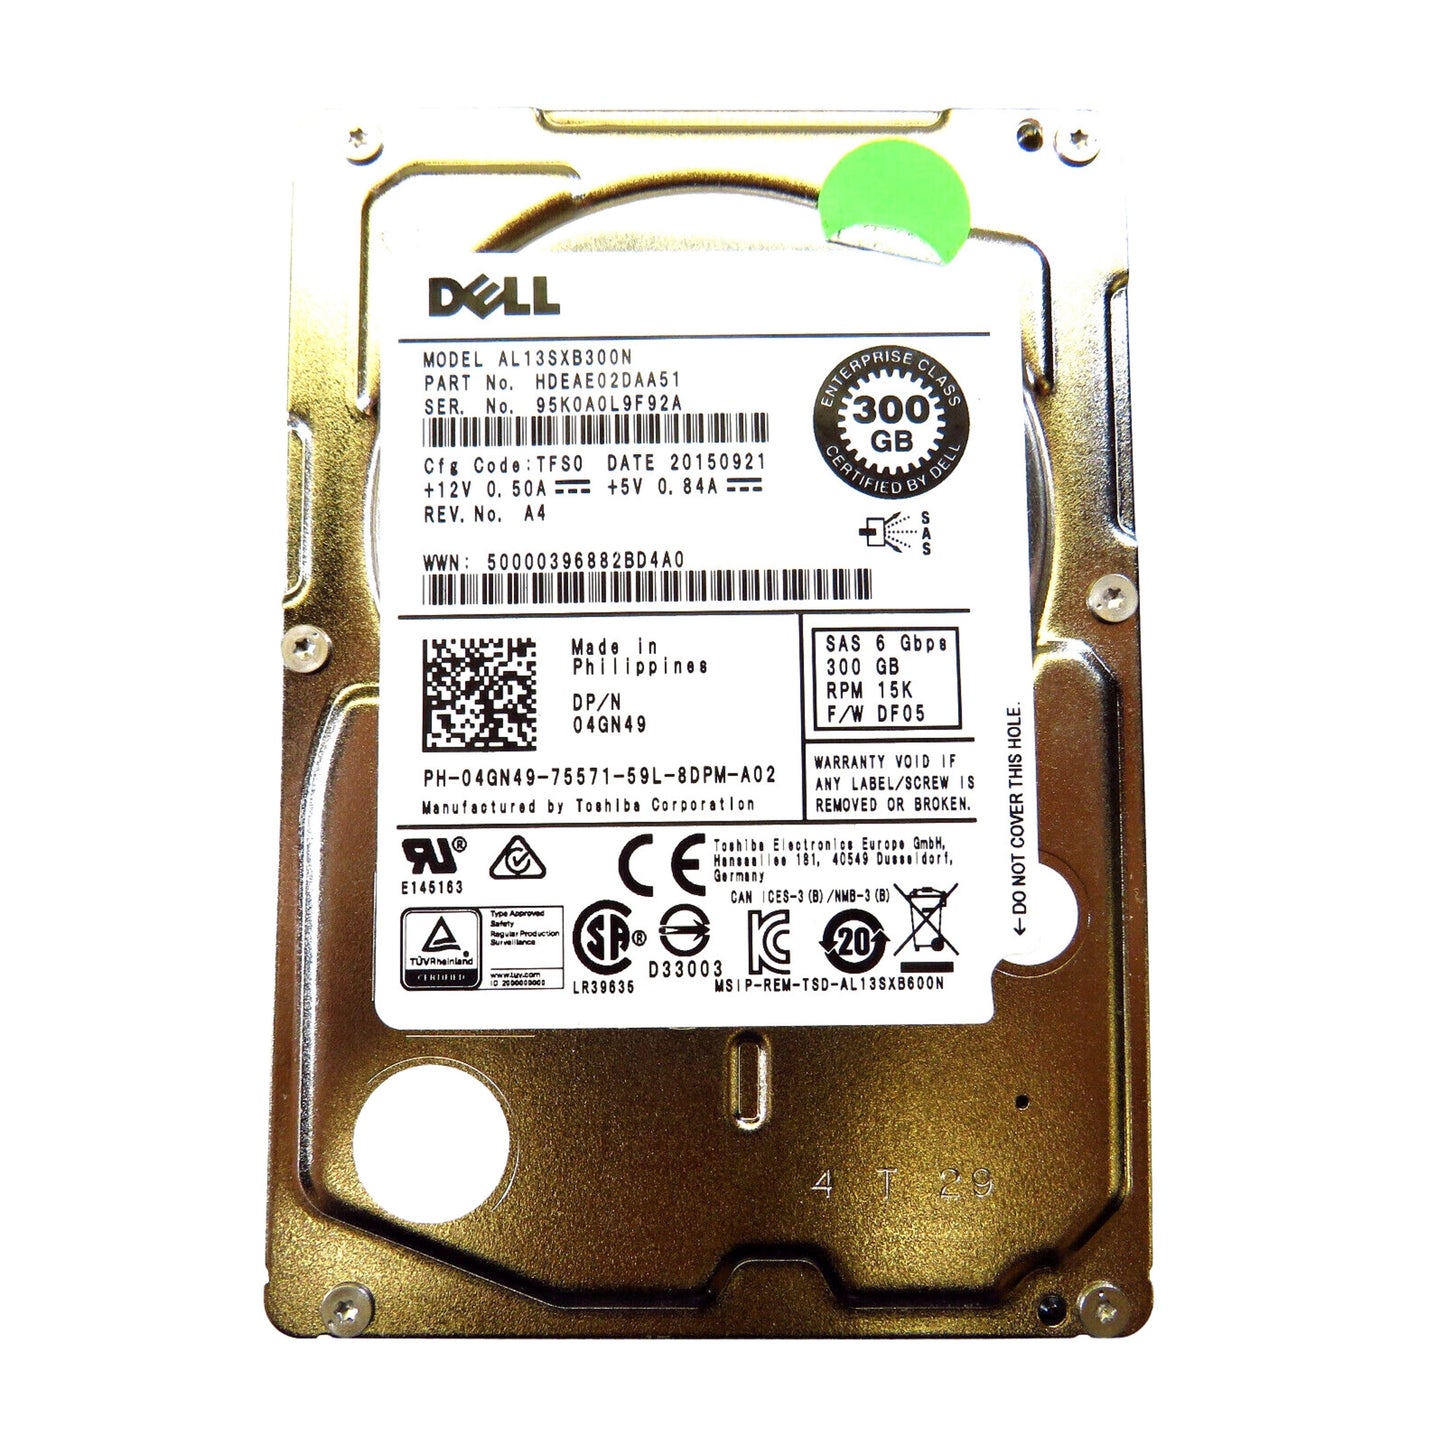 Dell 4GN49 2.5" 300GB 15000RPM SAS 6Gb/s Hard Disk Drive (HDD), Silver (Refurbished)